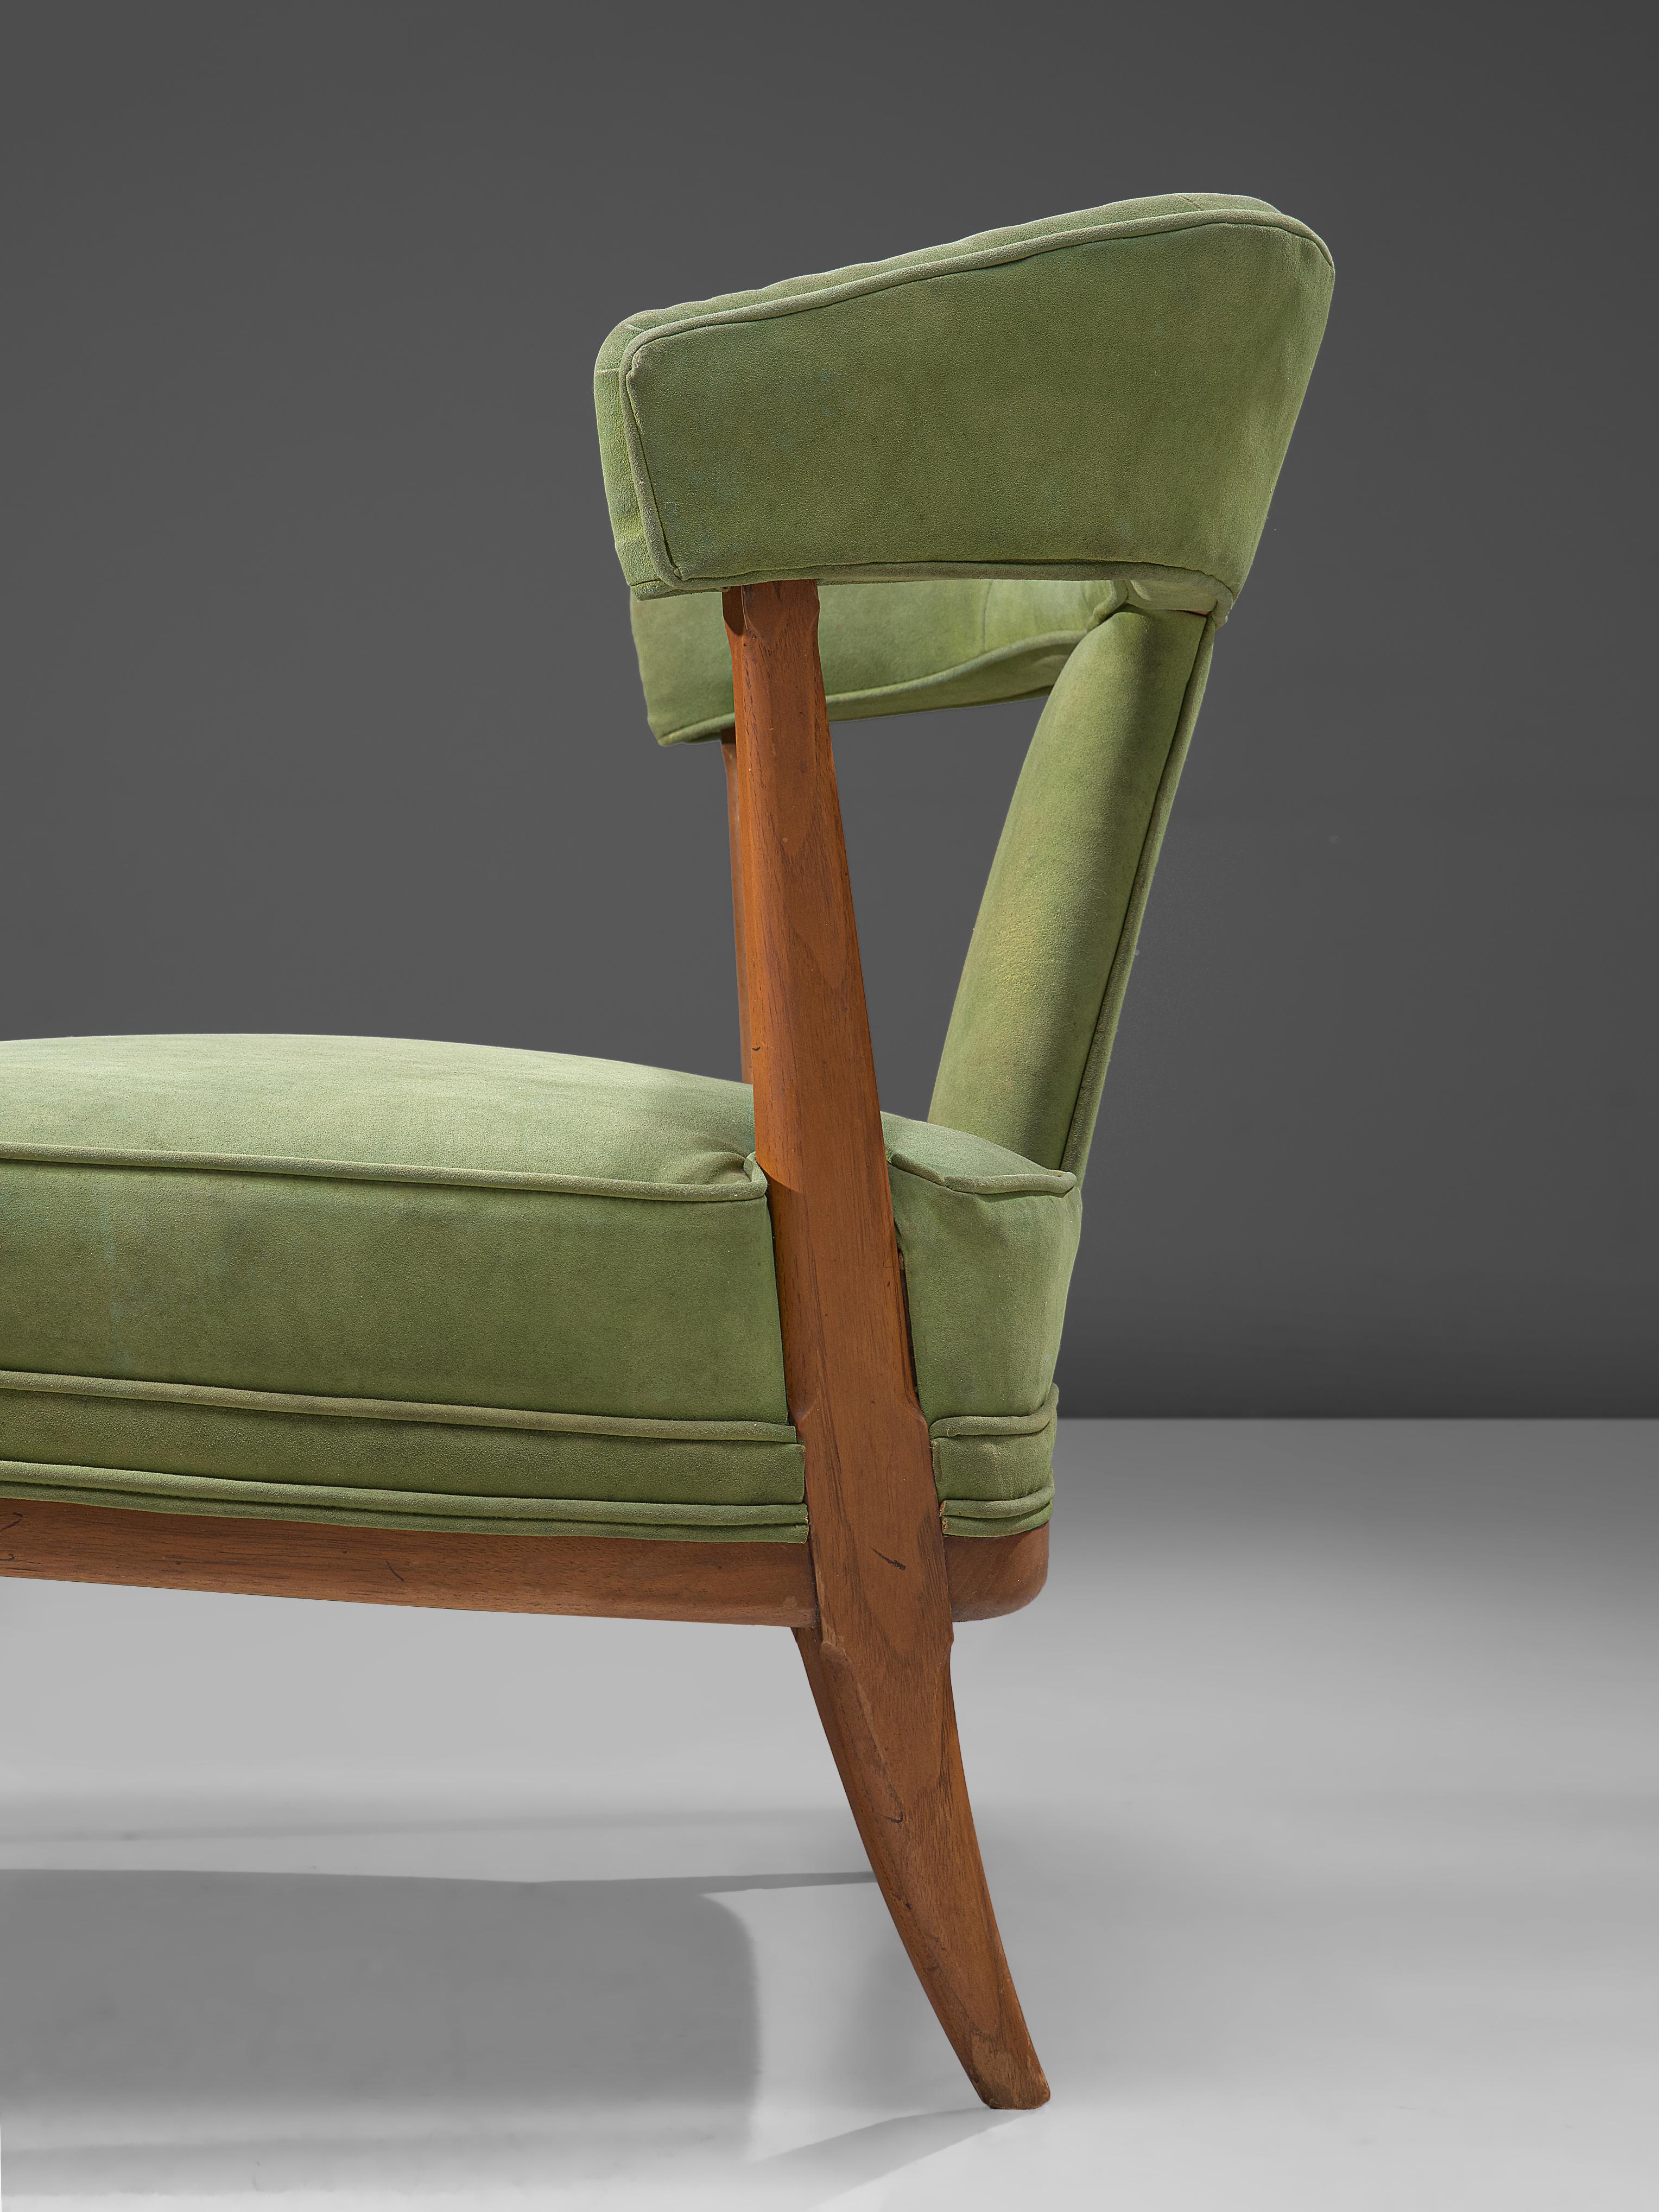 Mid-20th Century Pair of Wide American Lounge Chairs in Beech and Green Upholstery